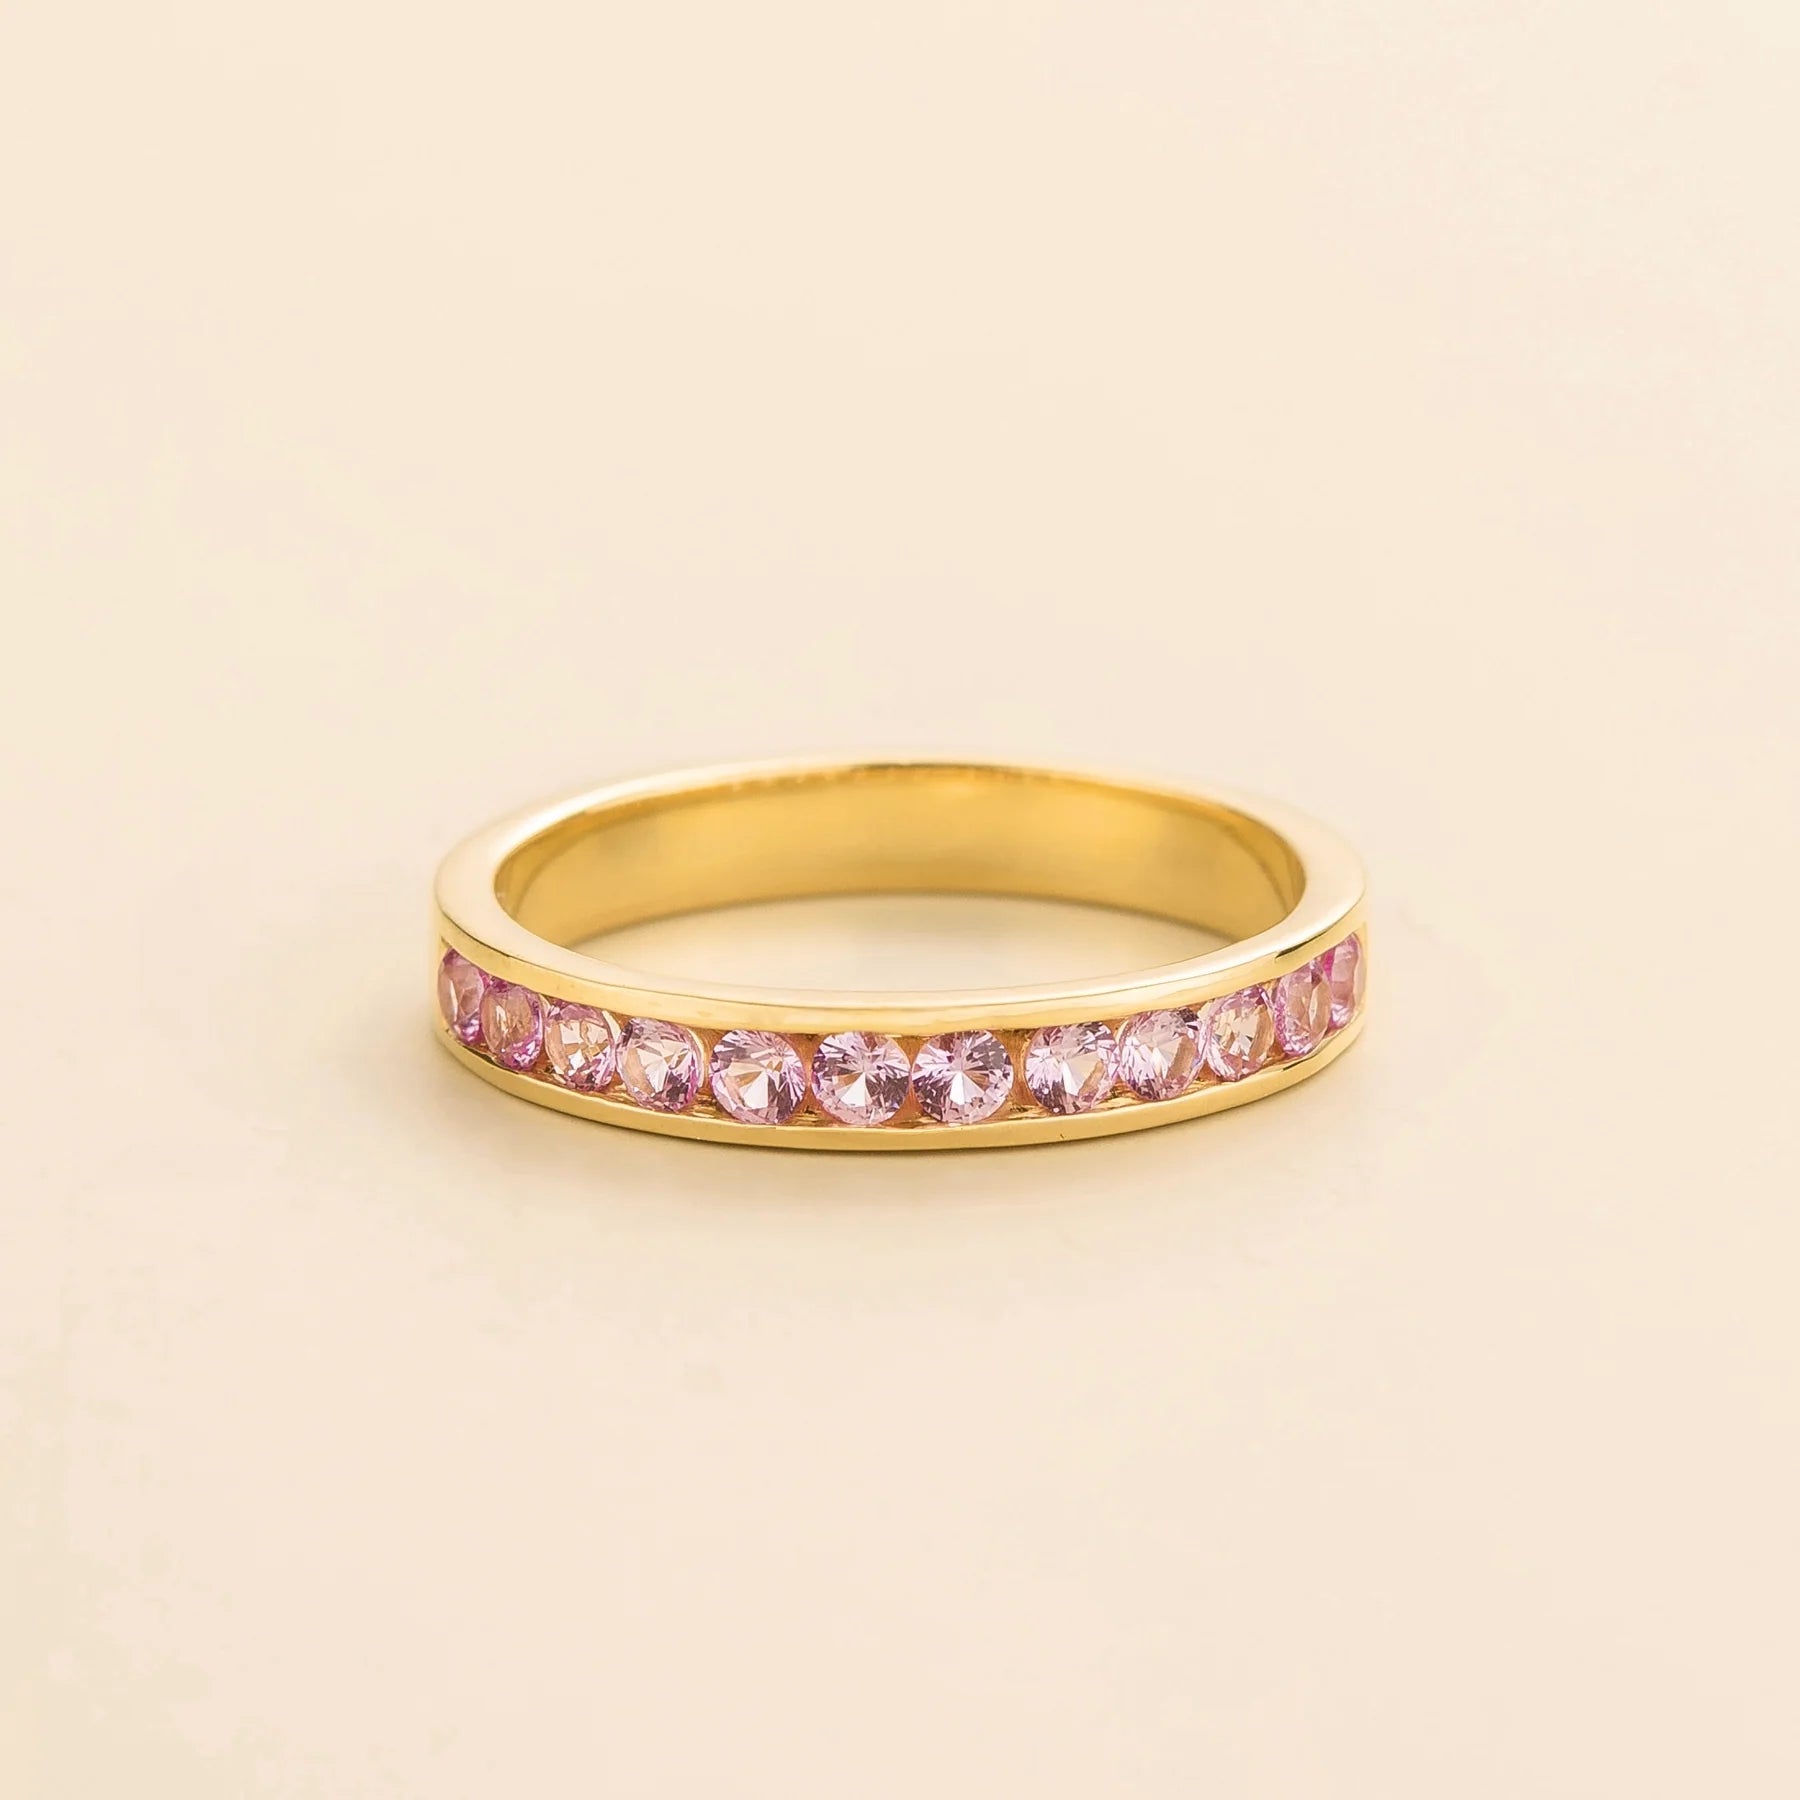 Margo Gold Ring Set With Pink Sapphire By Juvetti London